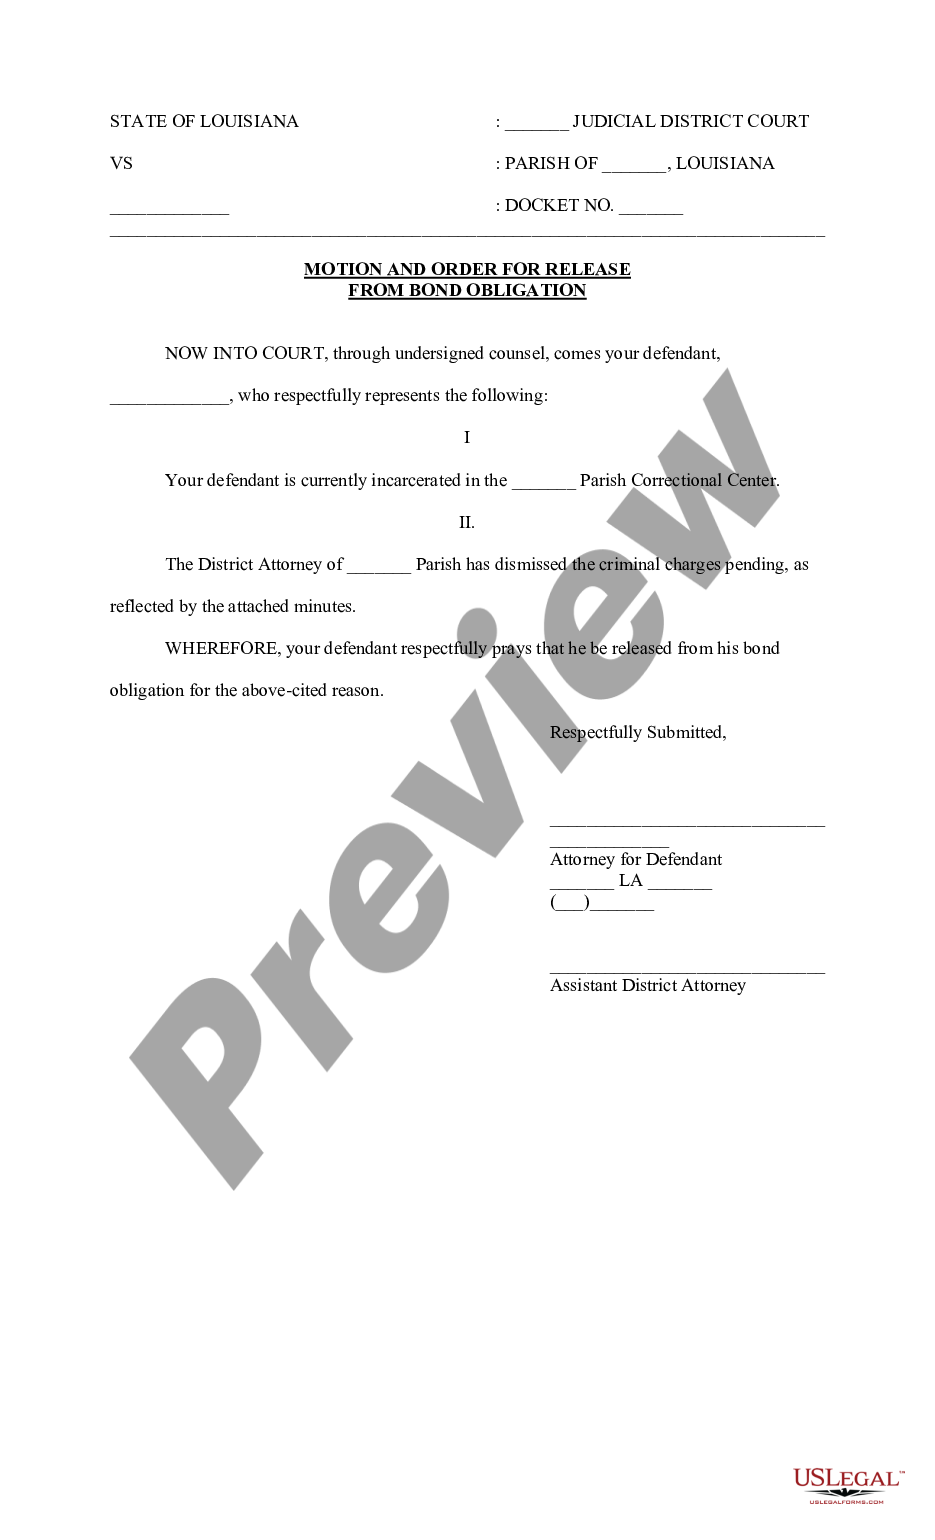 page 0 Motion and Order for Release from Bond Obligation preview